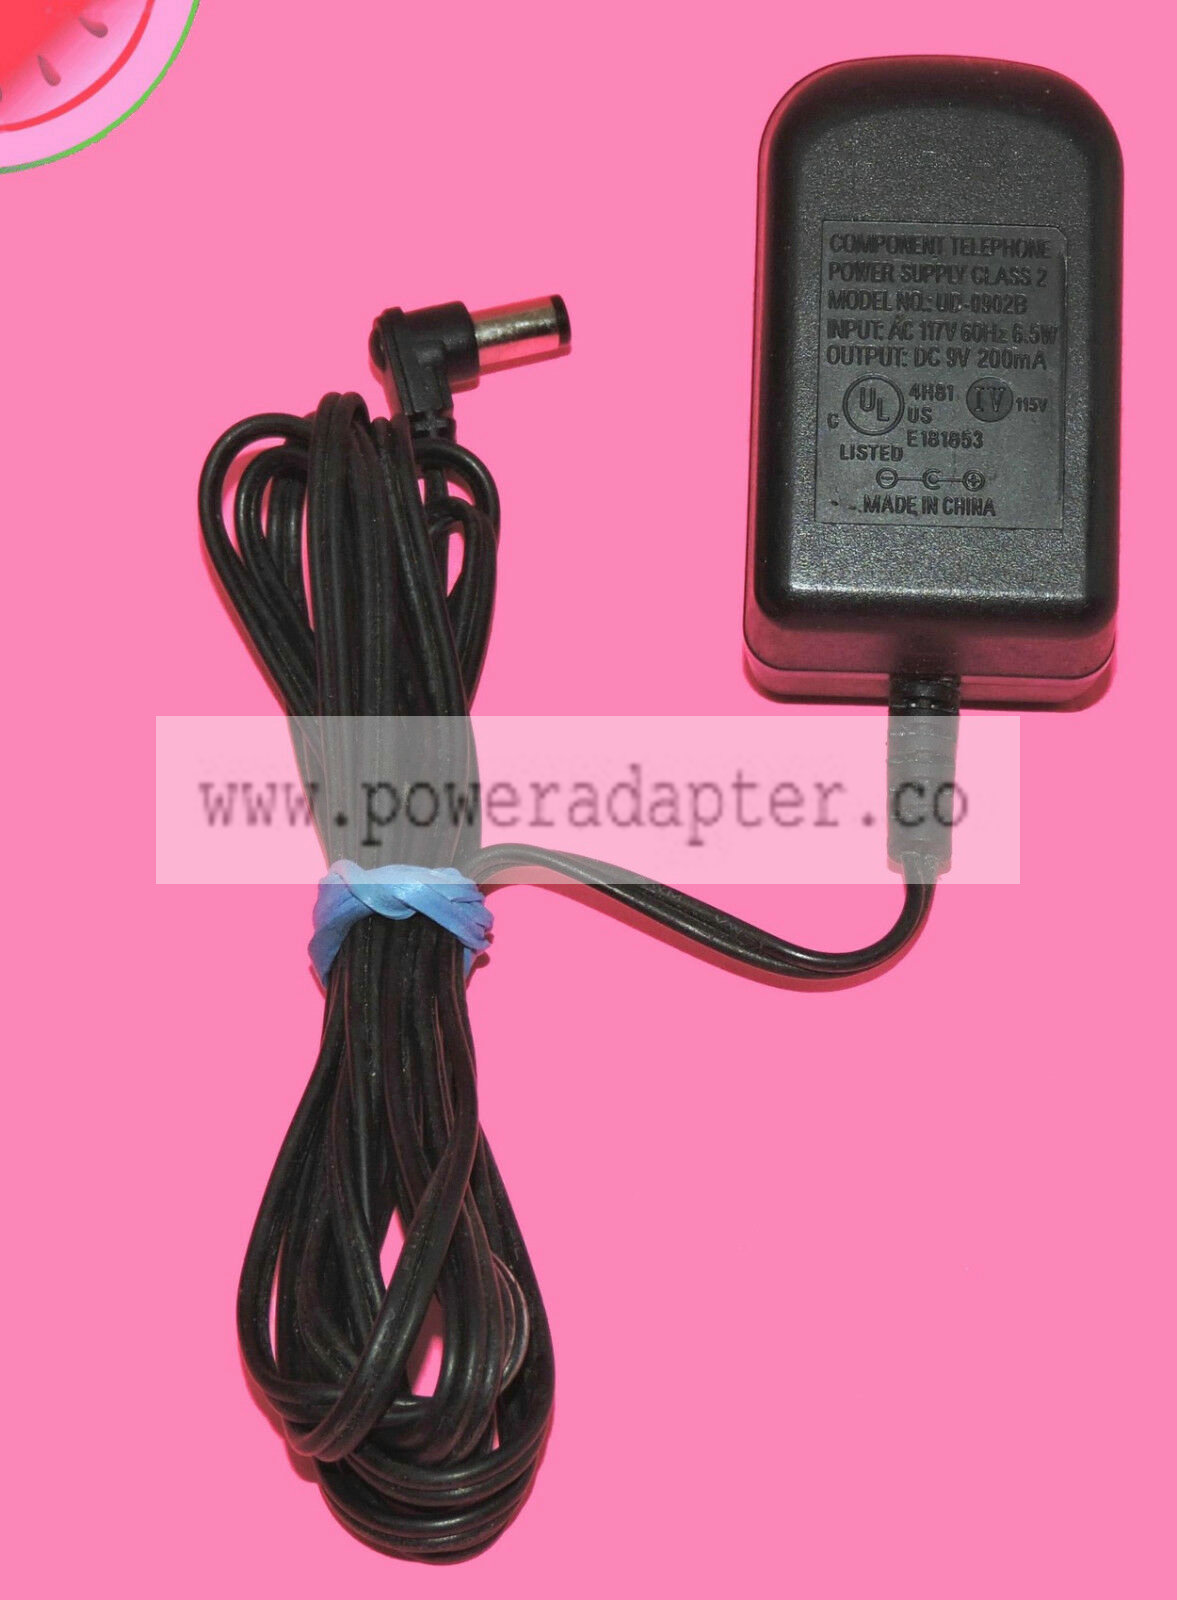 Power Supply Adapter COMPONENT TELEPHONE UD-0902B AC / DC 9v 250mA Model: UD-0902B Brand: COMPONENT TELEPHONE Outp